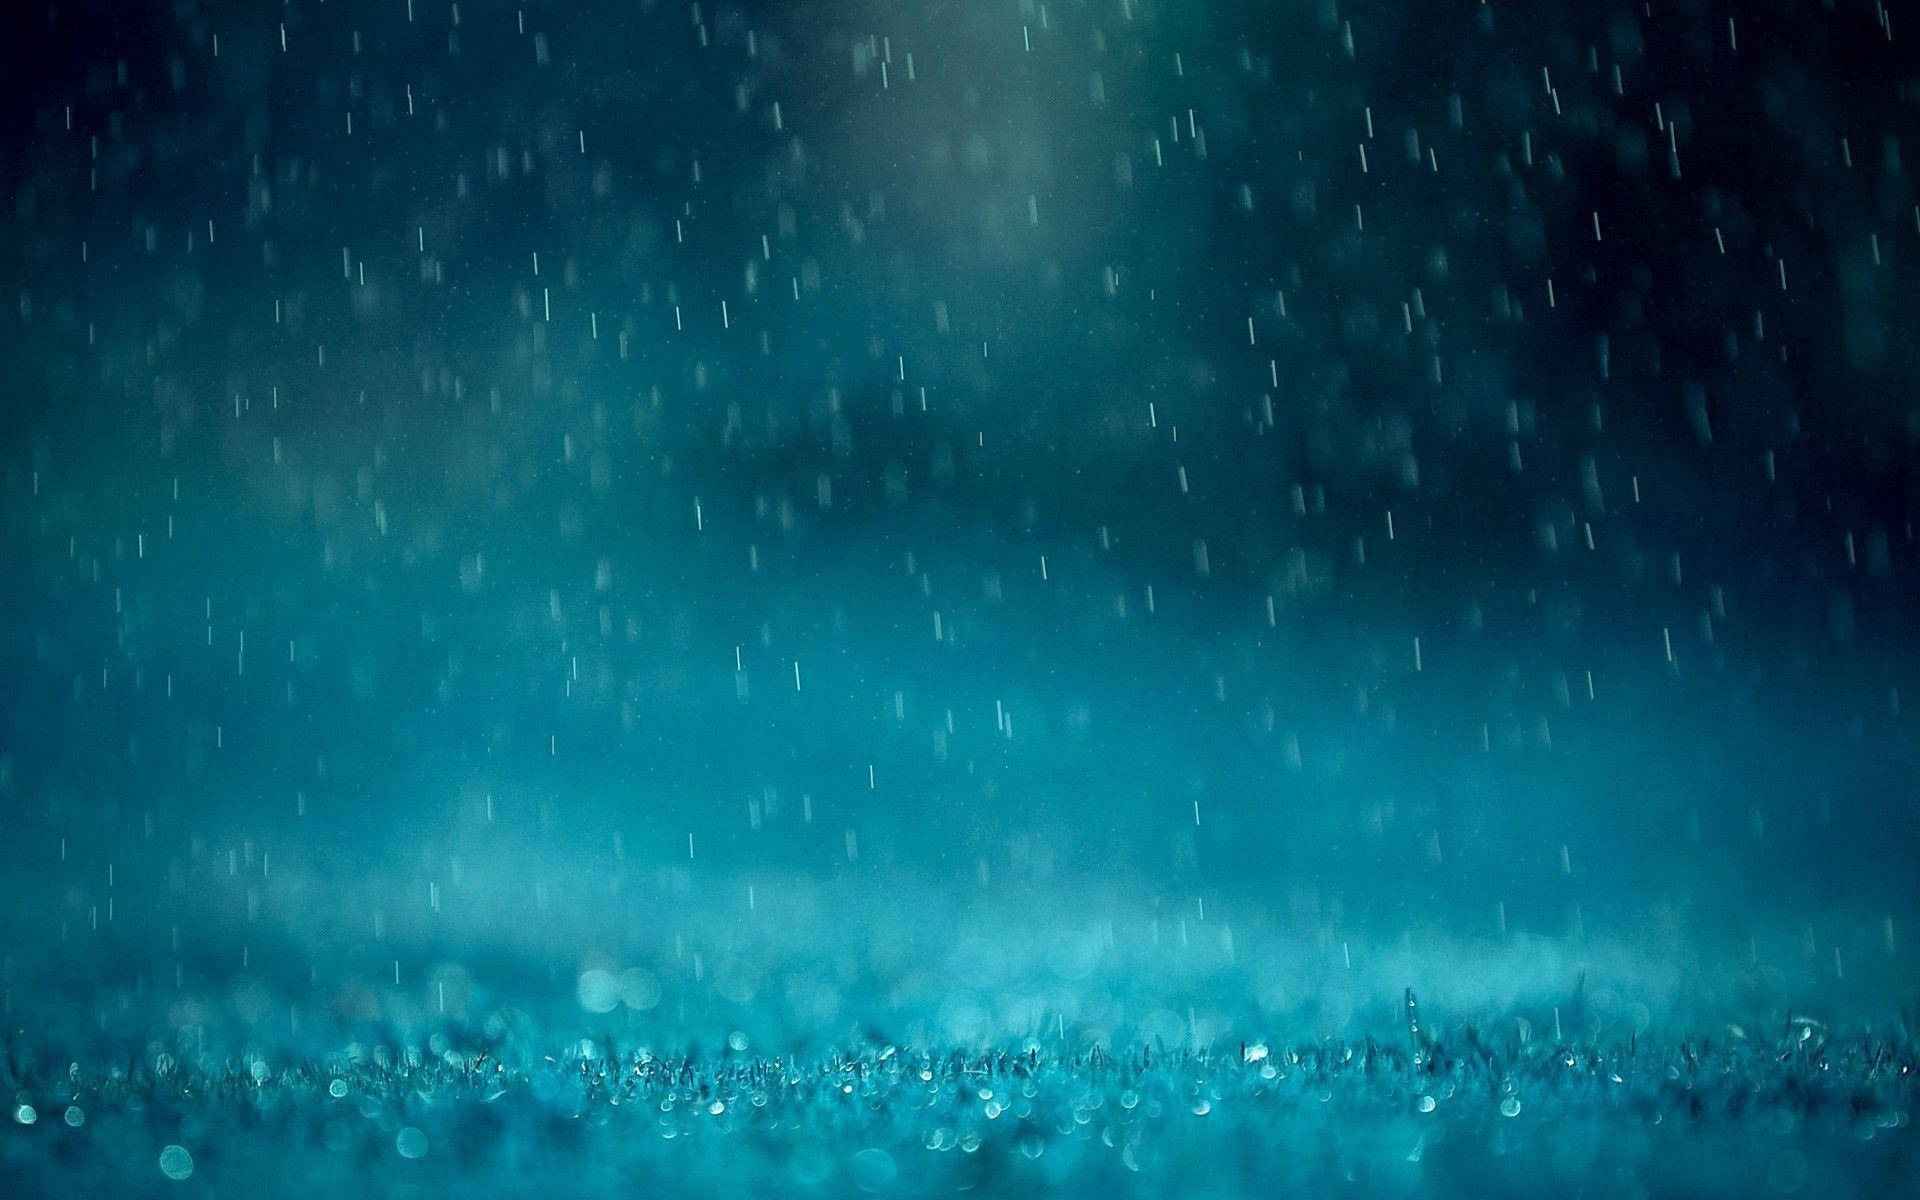 Downpouring Most Beautiful Rain Background